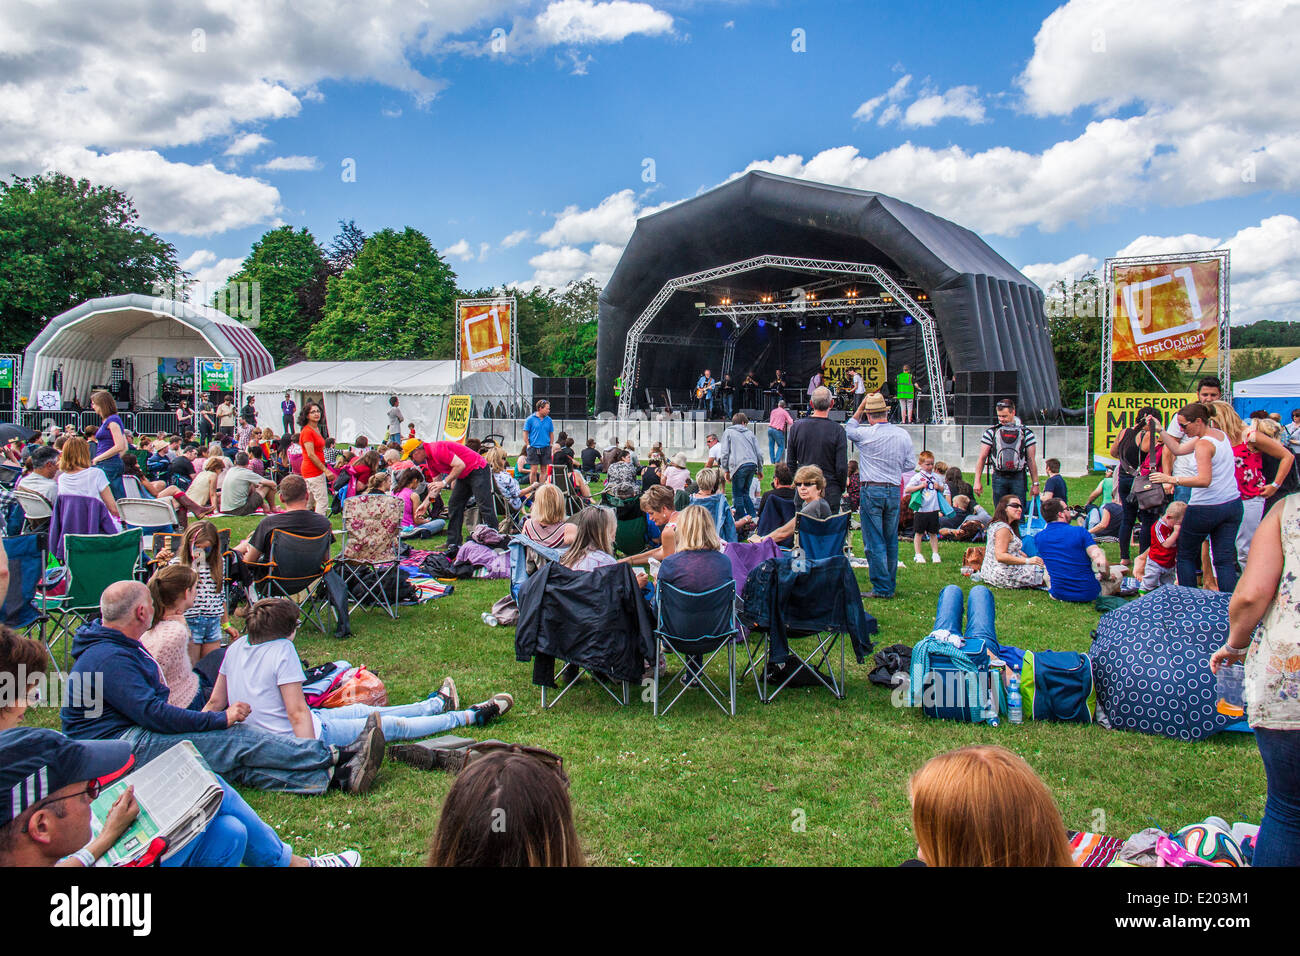 Main stage at the Alresford Music Festival, Arlebury park, Alresford, Hampshire England 2014 Stock Photo